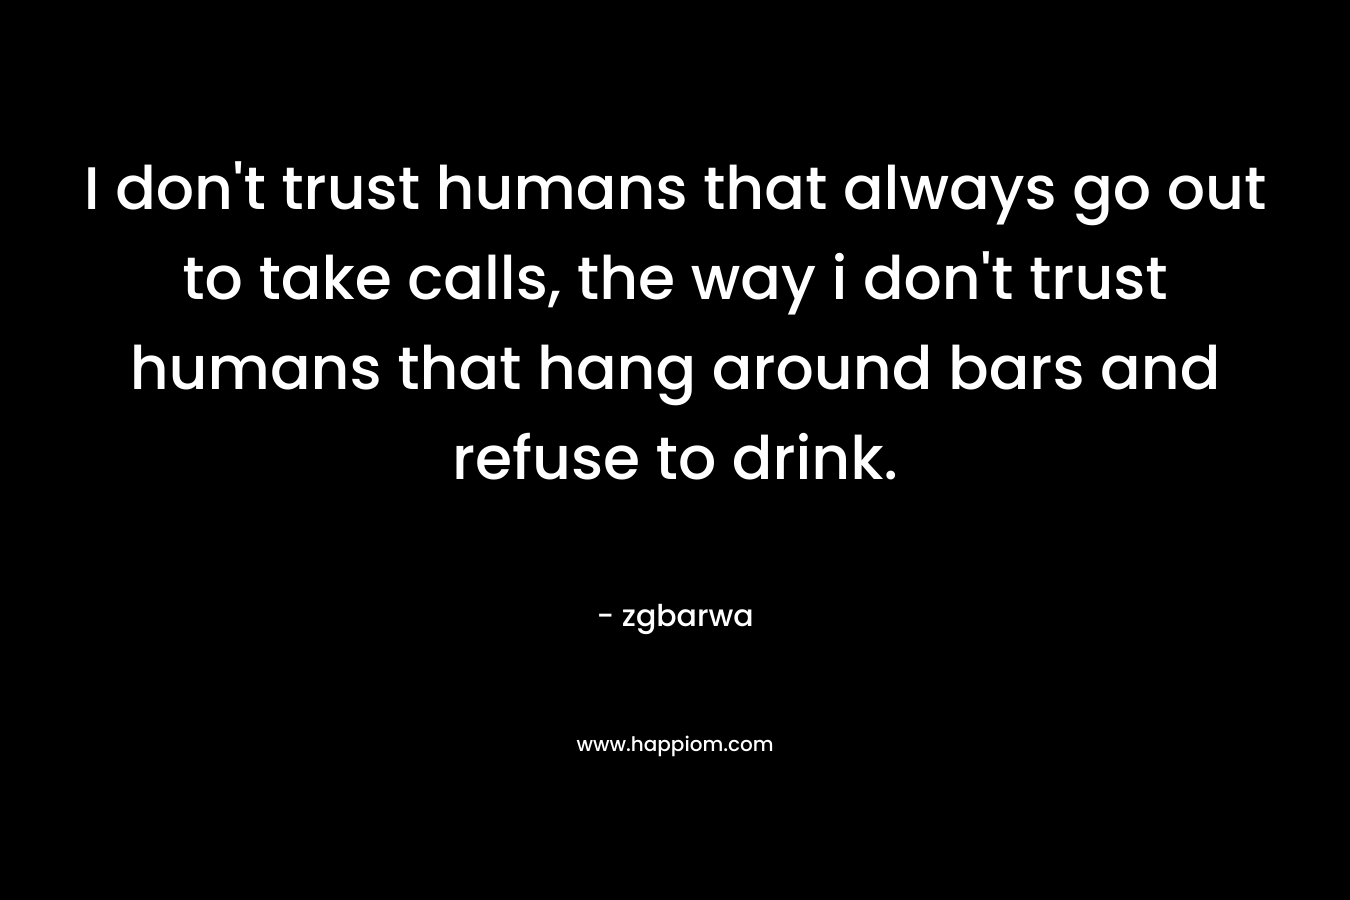 I don’t trust humans that always go out to take calls, the way i don’t trust humans that hang around bars and refuse to drink. – zgbarwa